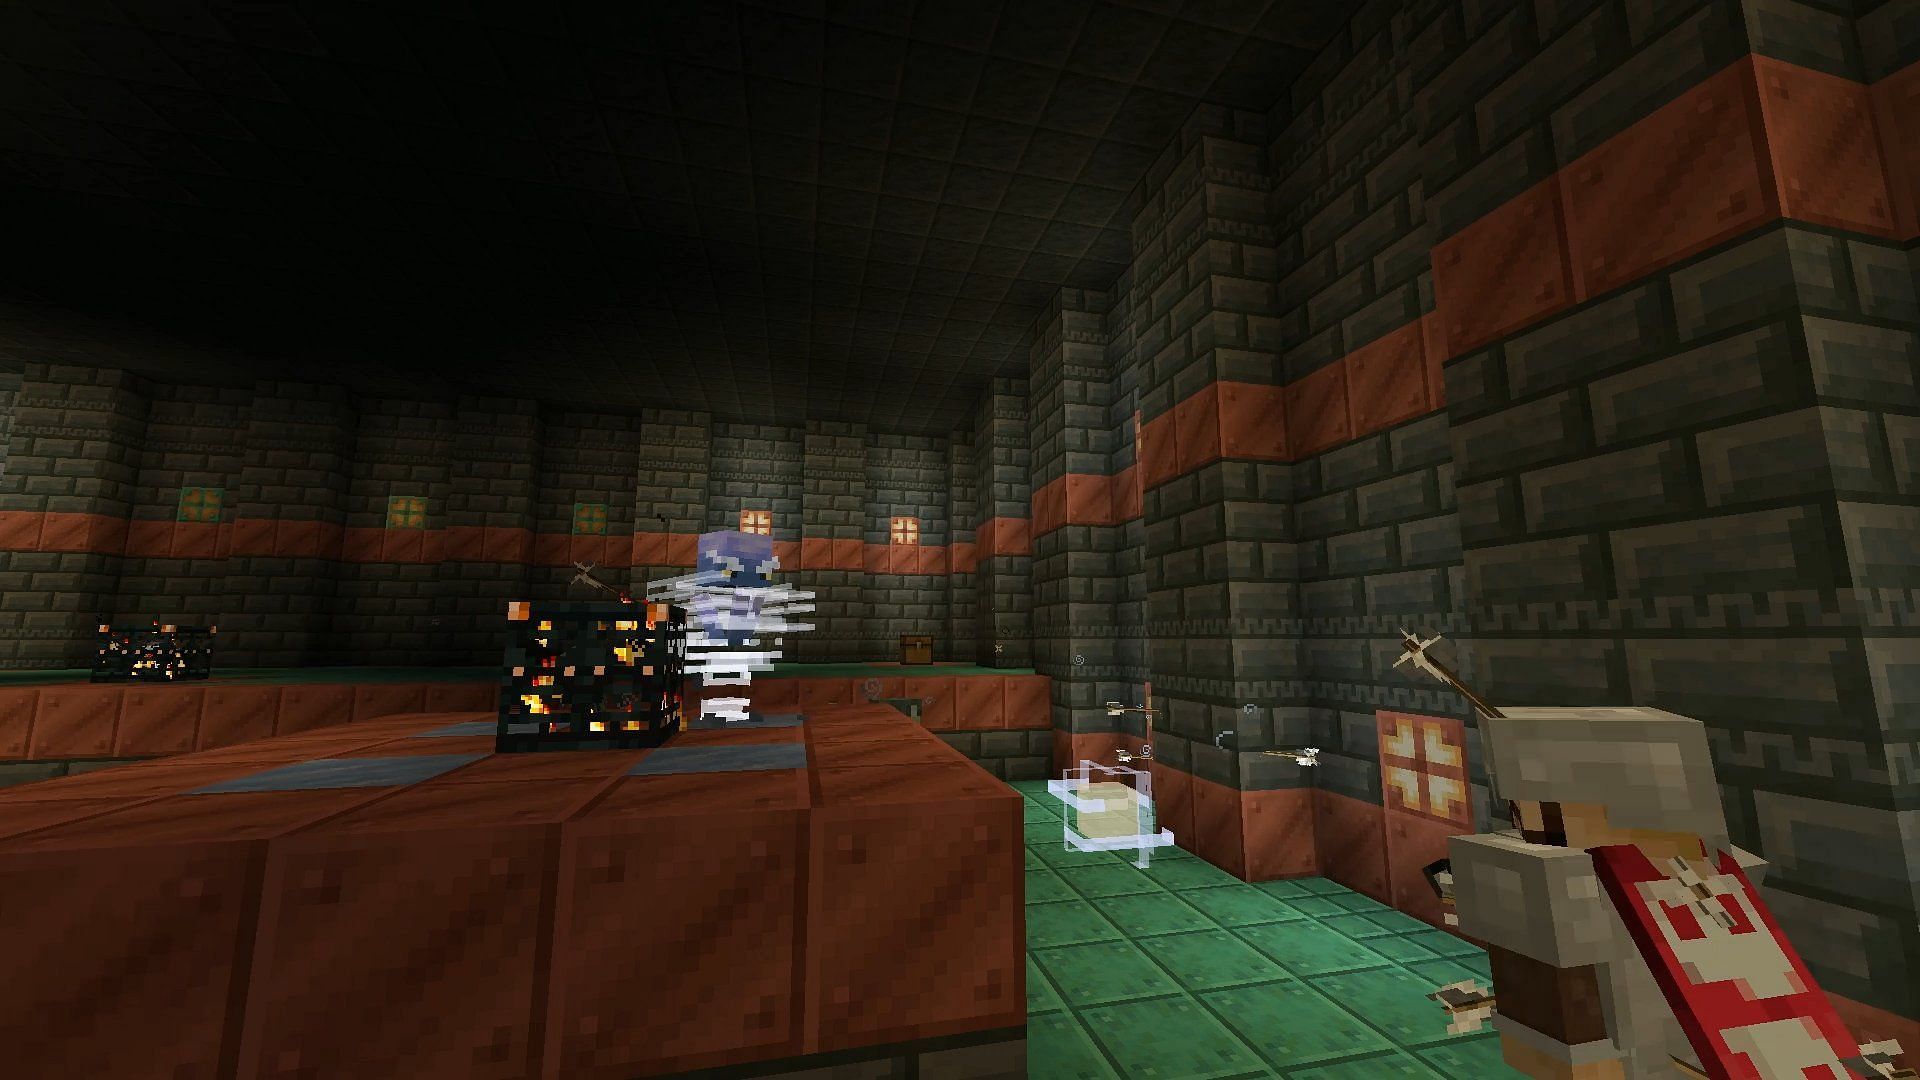 Breezes are playful but dangerous in the Minecraft 1.21 update (Image via Mojang Studios)